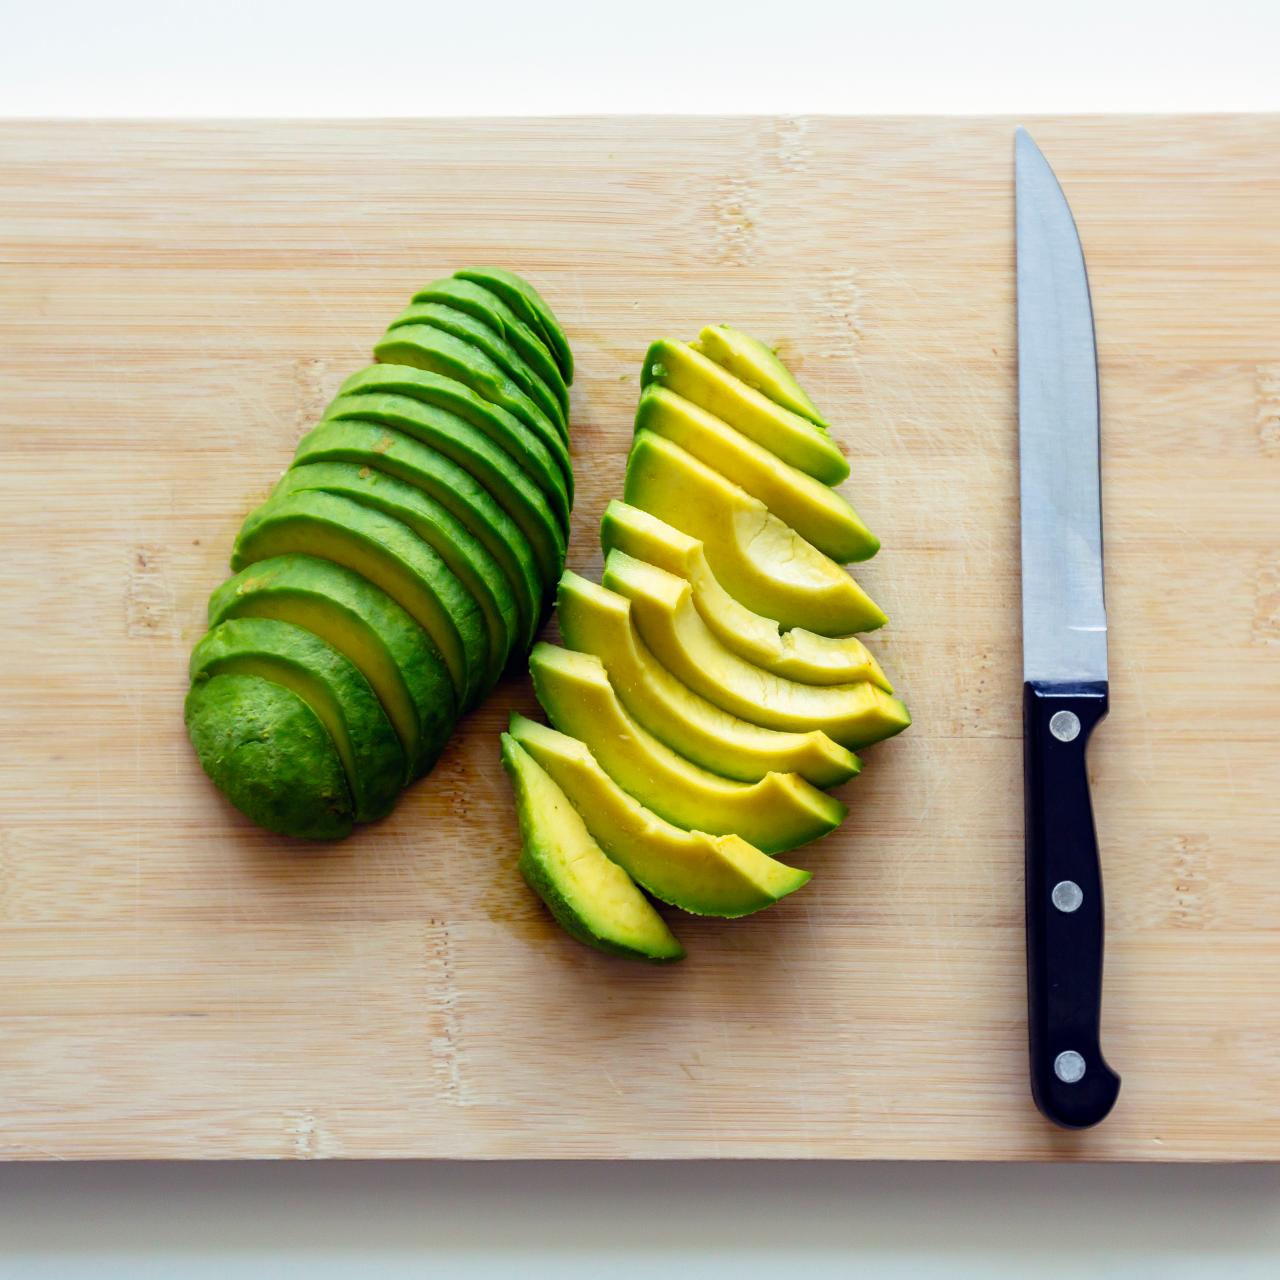 How to Store Avocados the Right Way